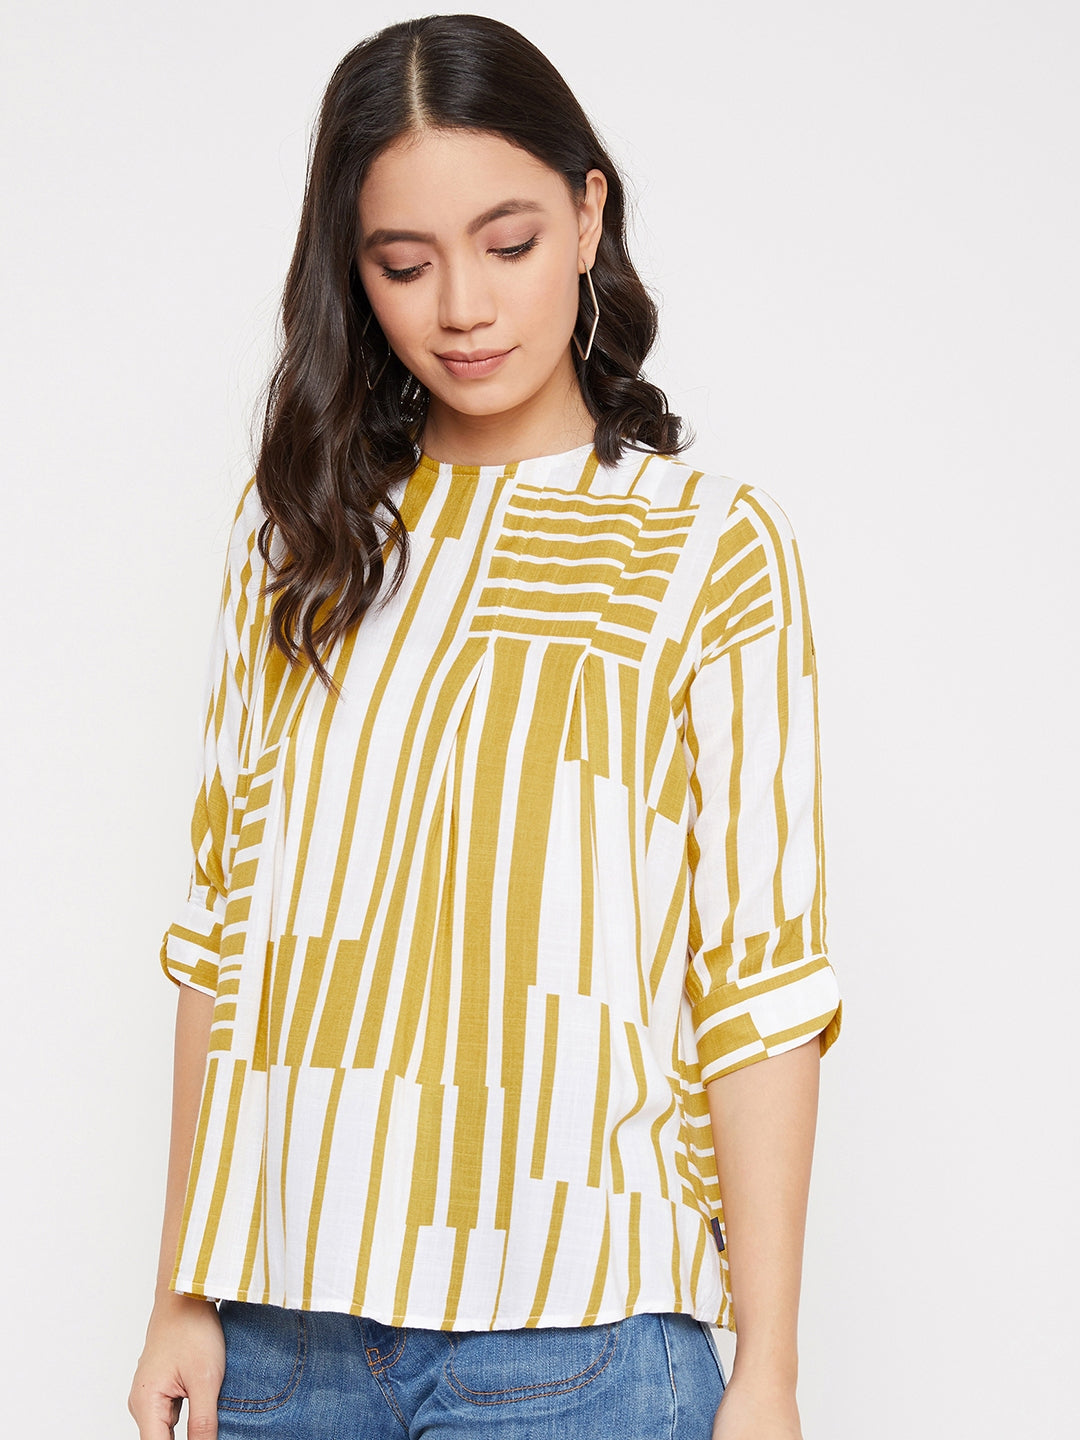 Yellow and White Colour blocked Top - Women Tops